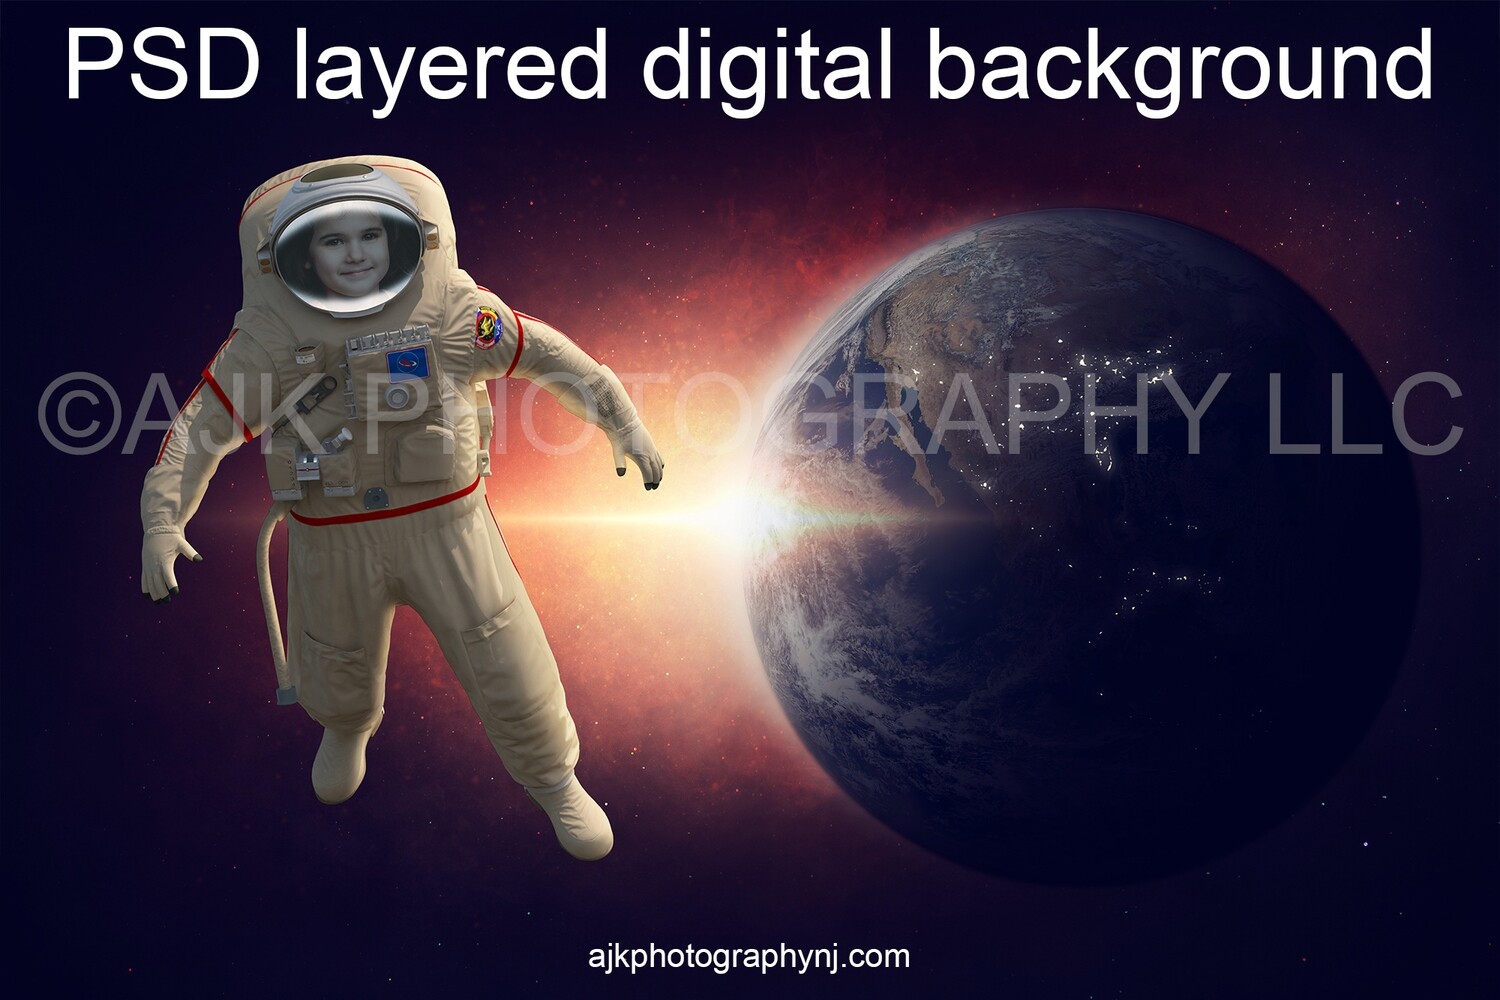 Astronaut digital background, one astronaut in outer space floating in front of the Earth and sun flare, digital backdrop